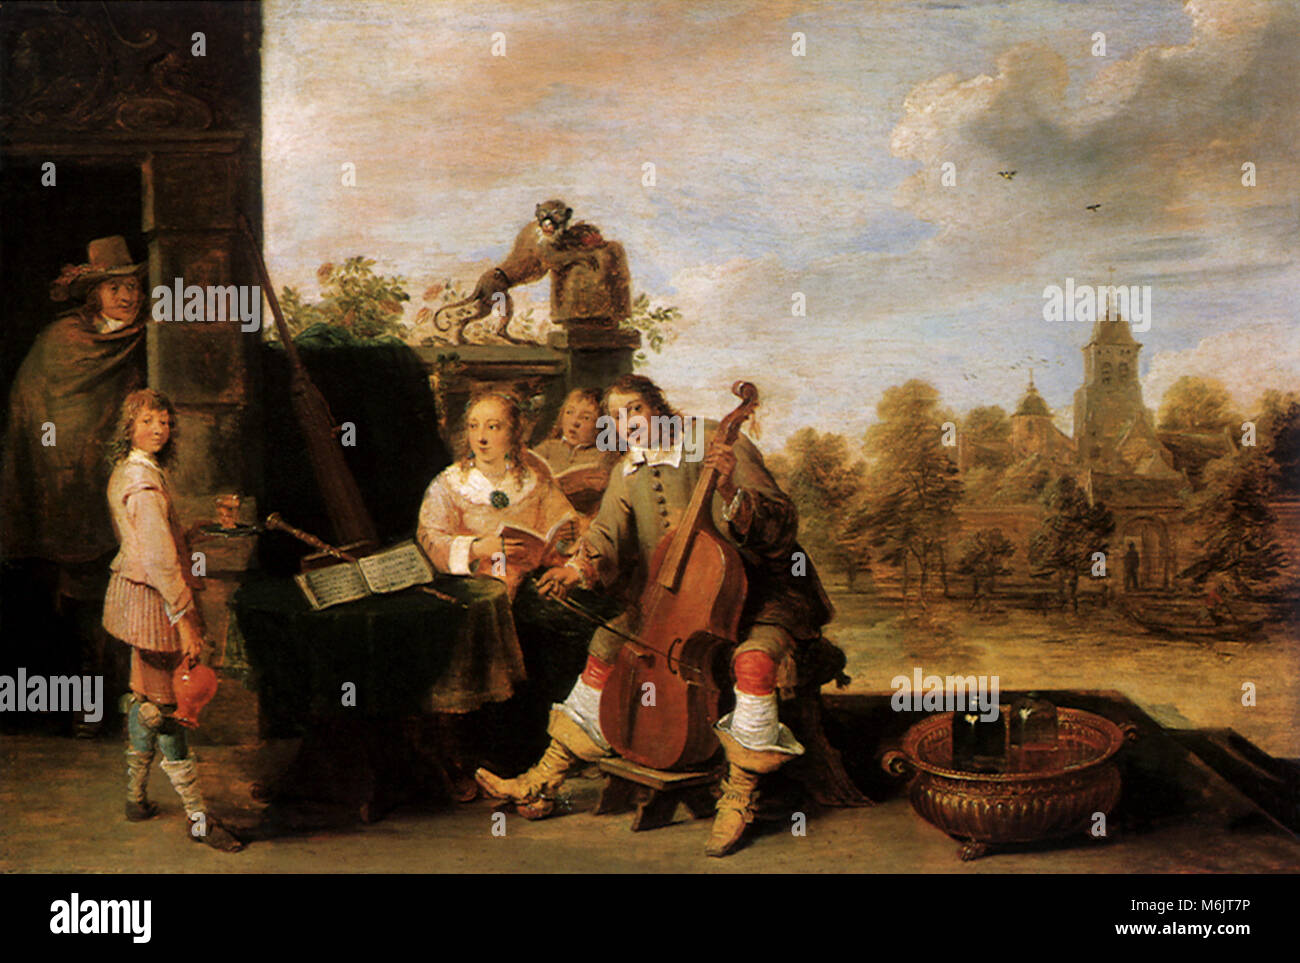 The Painter and His Family, Teniers, David, the Younger, 1645. Stock Photo